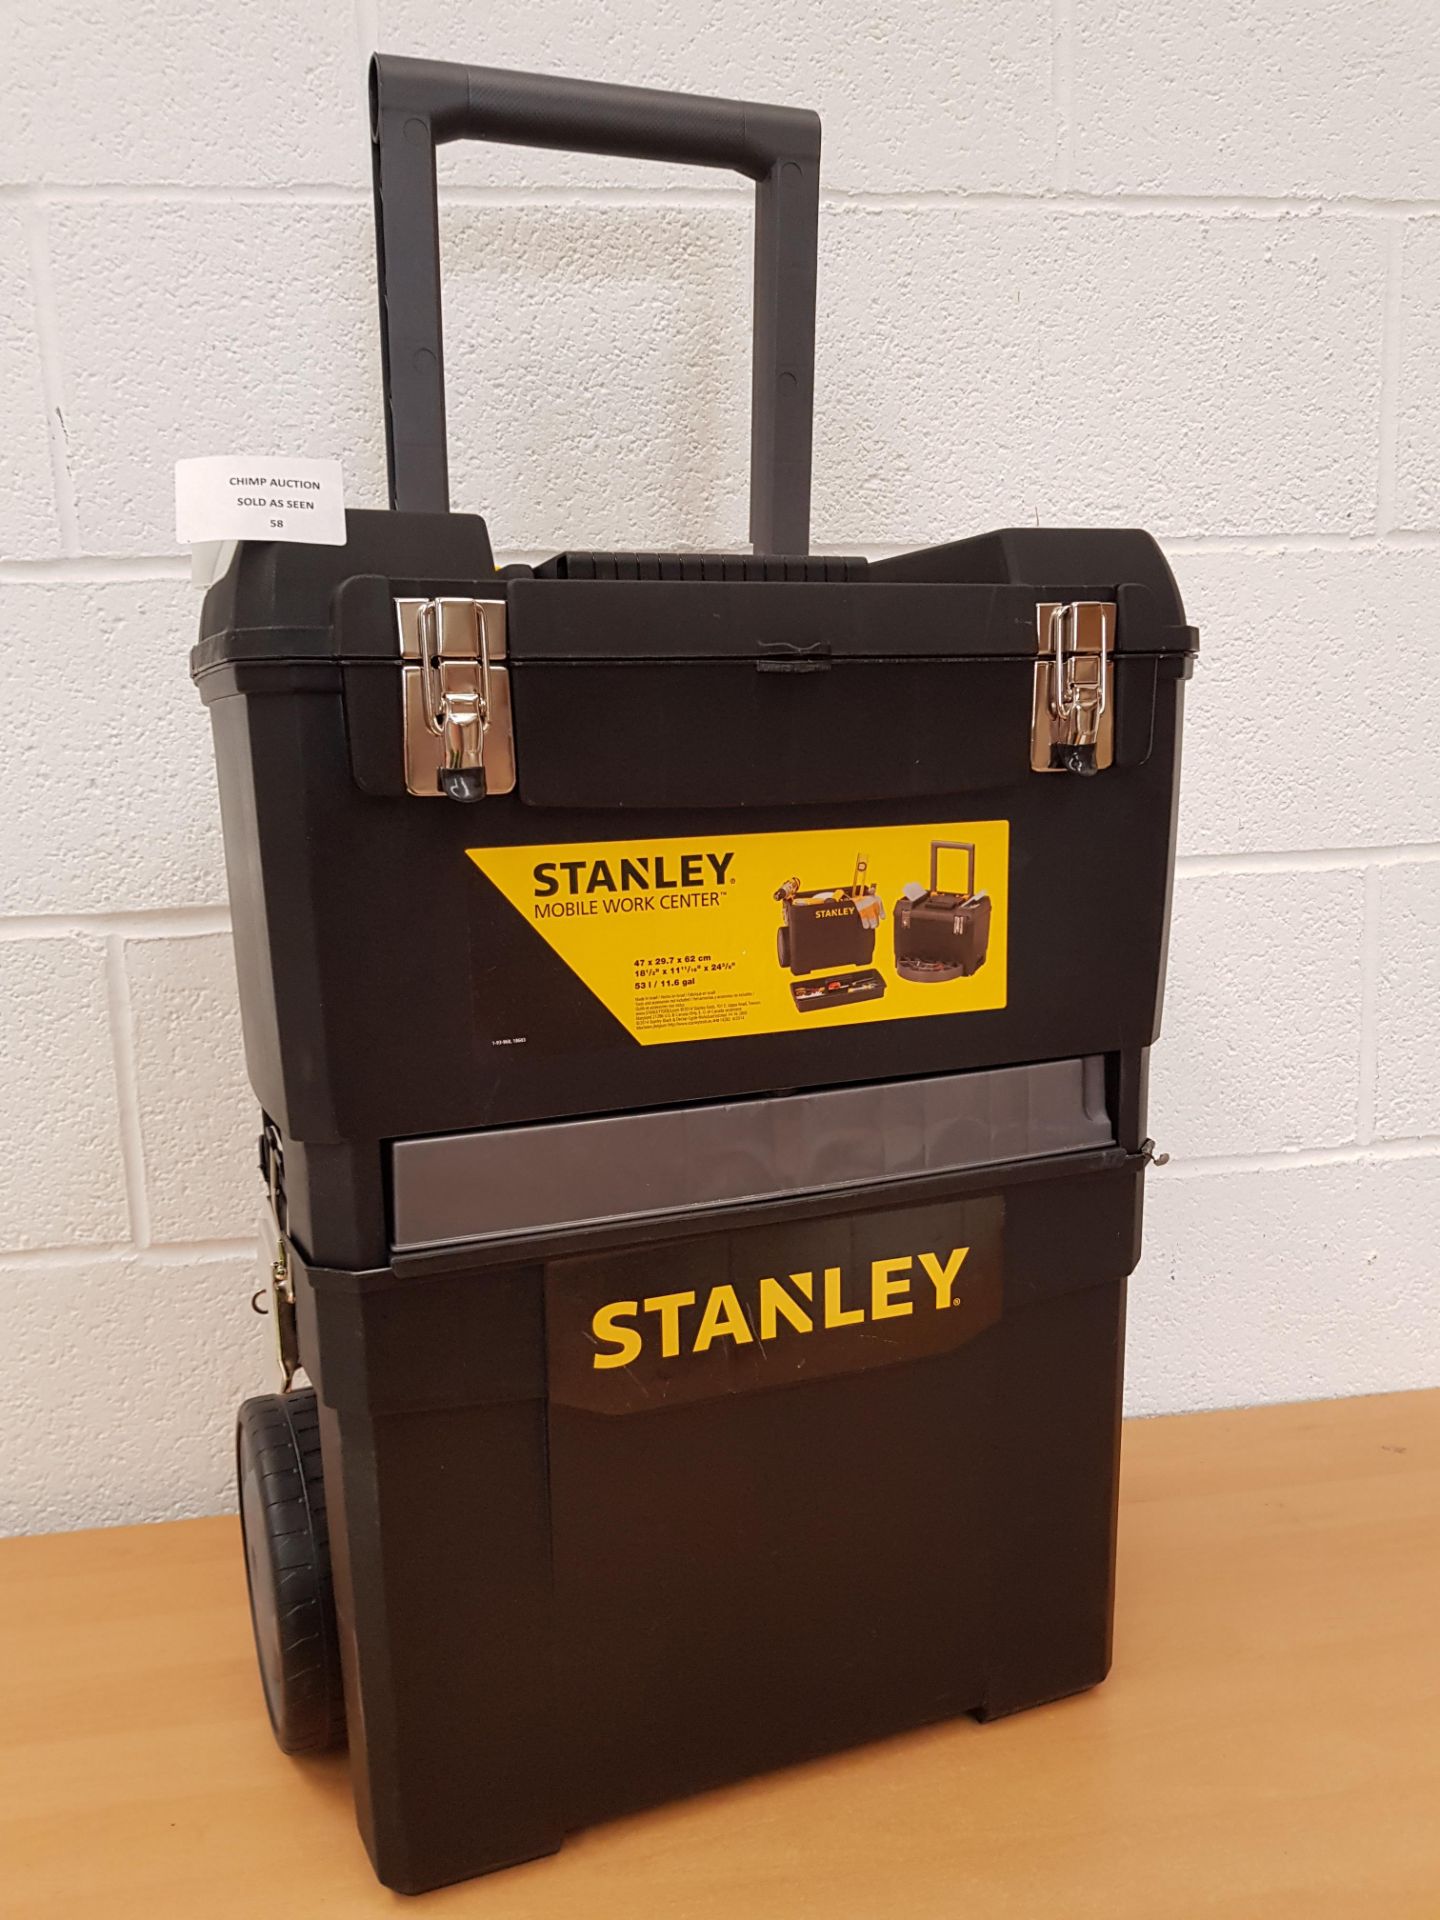 Stanley Rolling Mobile Work Center